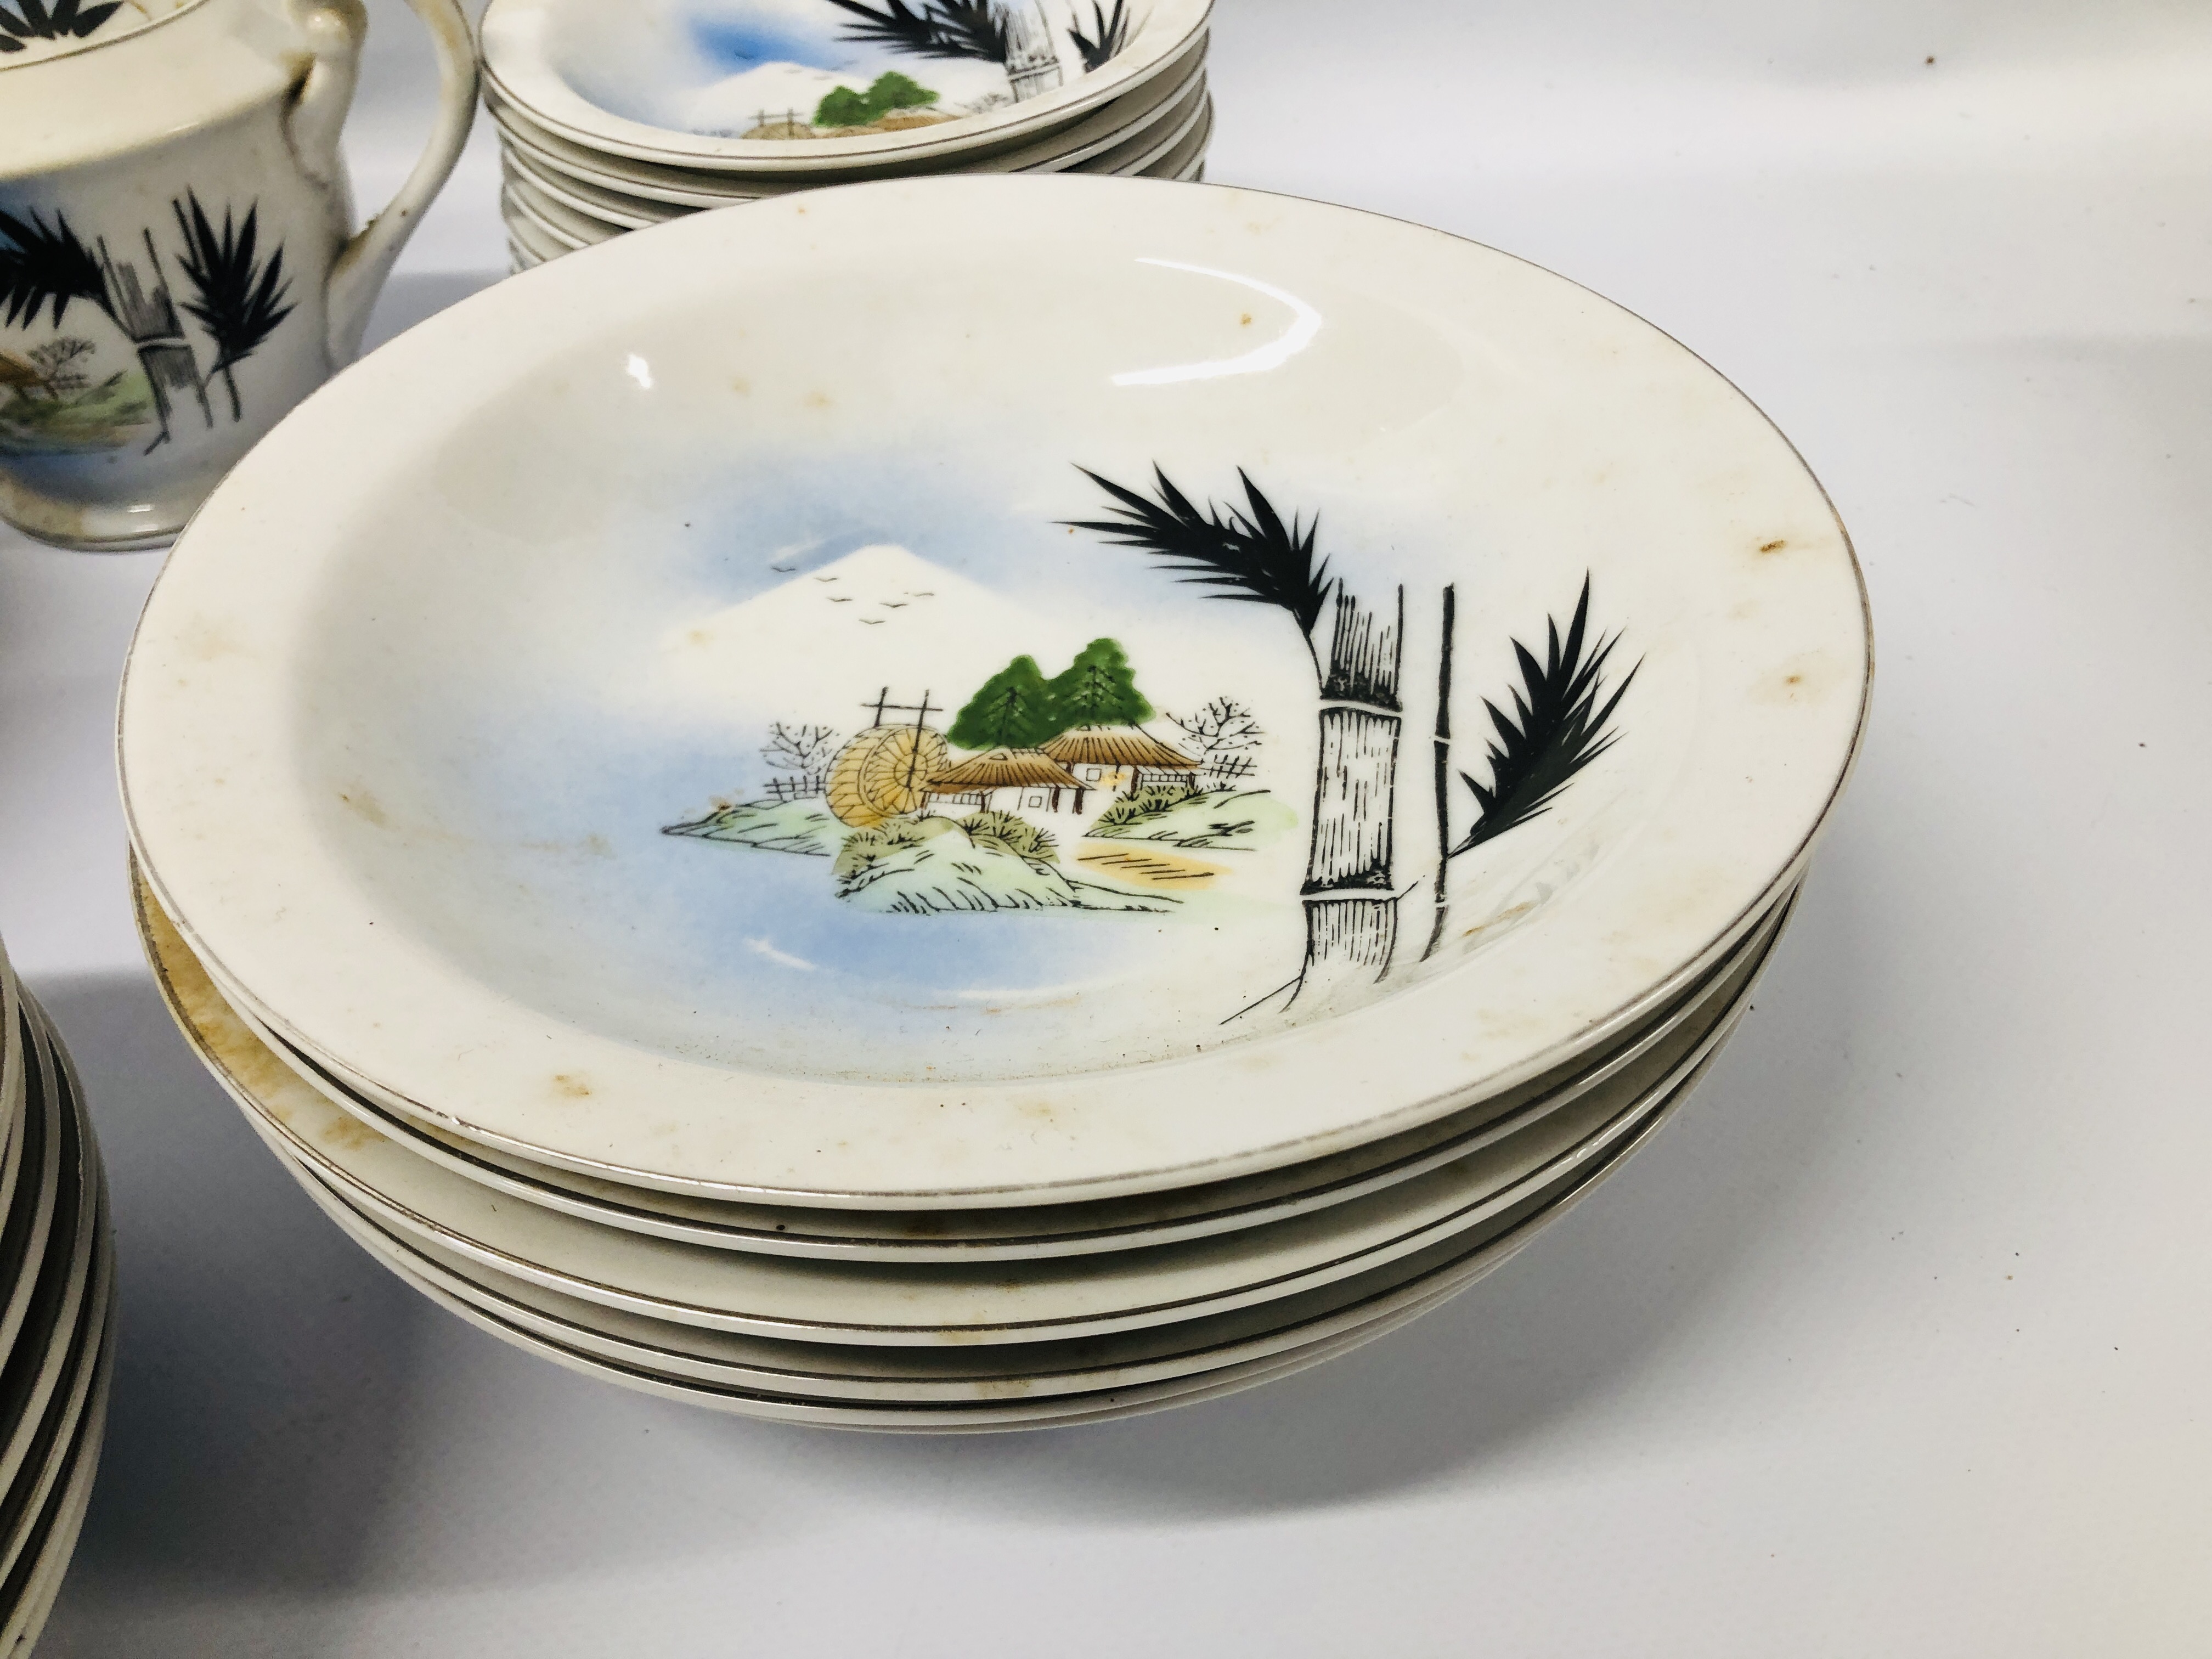 46 PIECES OF E & O CHINA WARE COMPRISING OF PLATES, BOWLS, CUPS AND SAUCERS, SERVING PLATE, - Bild 3 aus 18